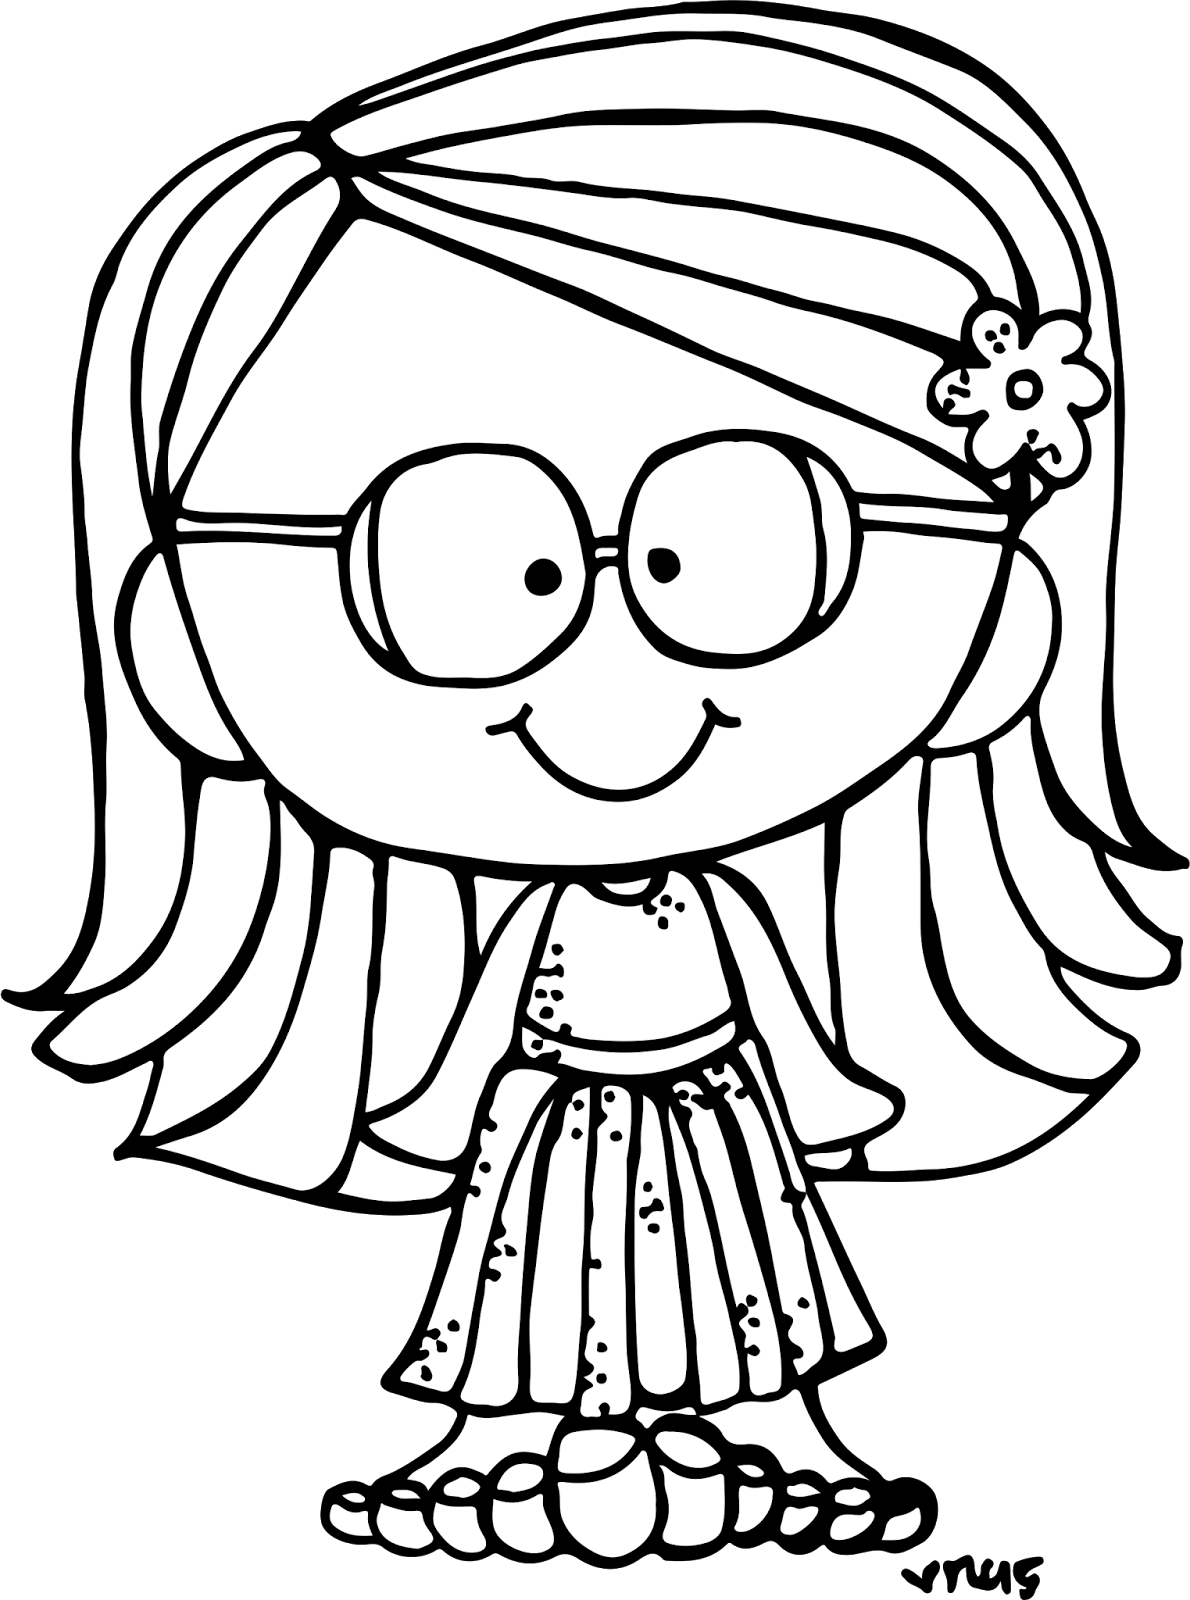 Crayons clipart black and white. Melonheadz illustrating we have